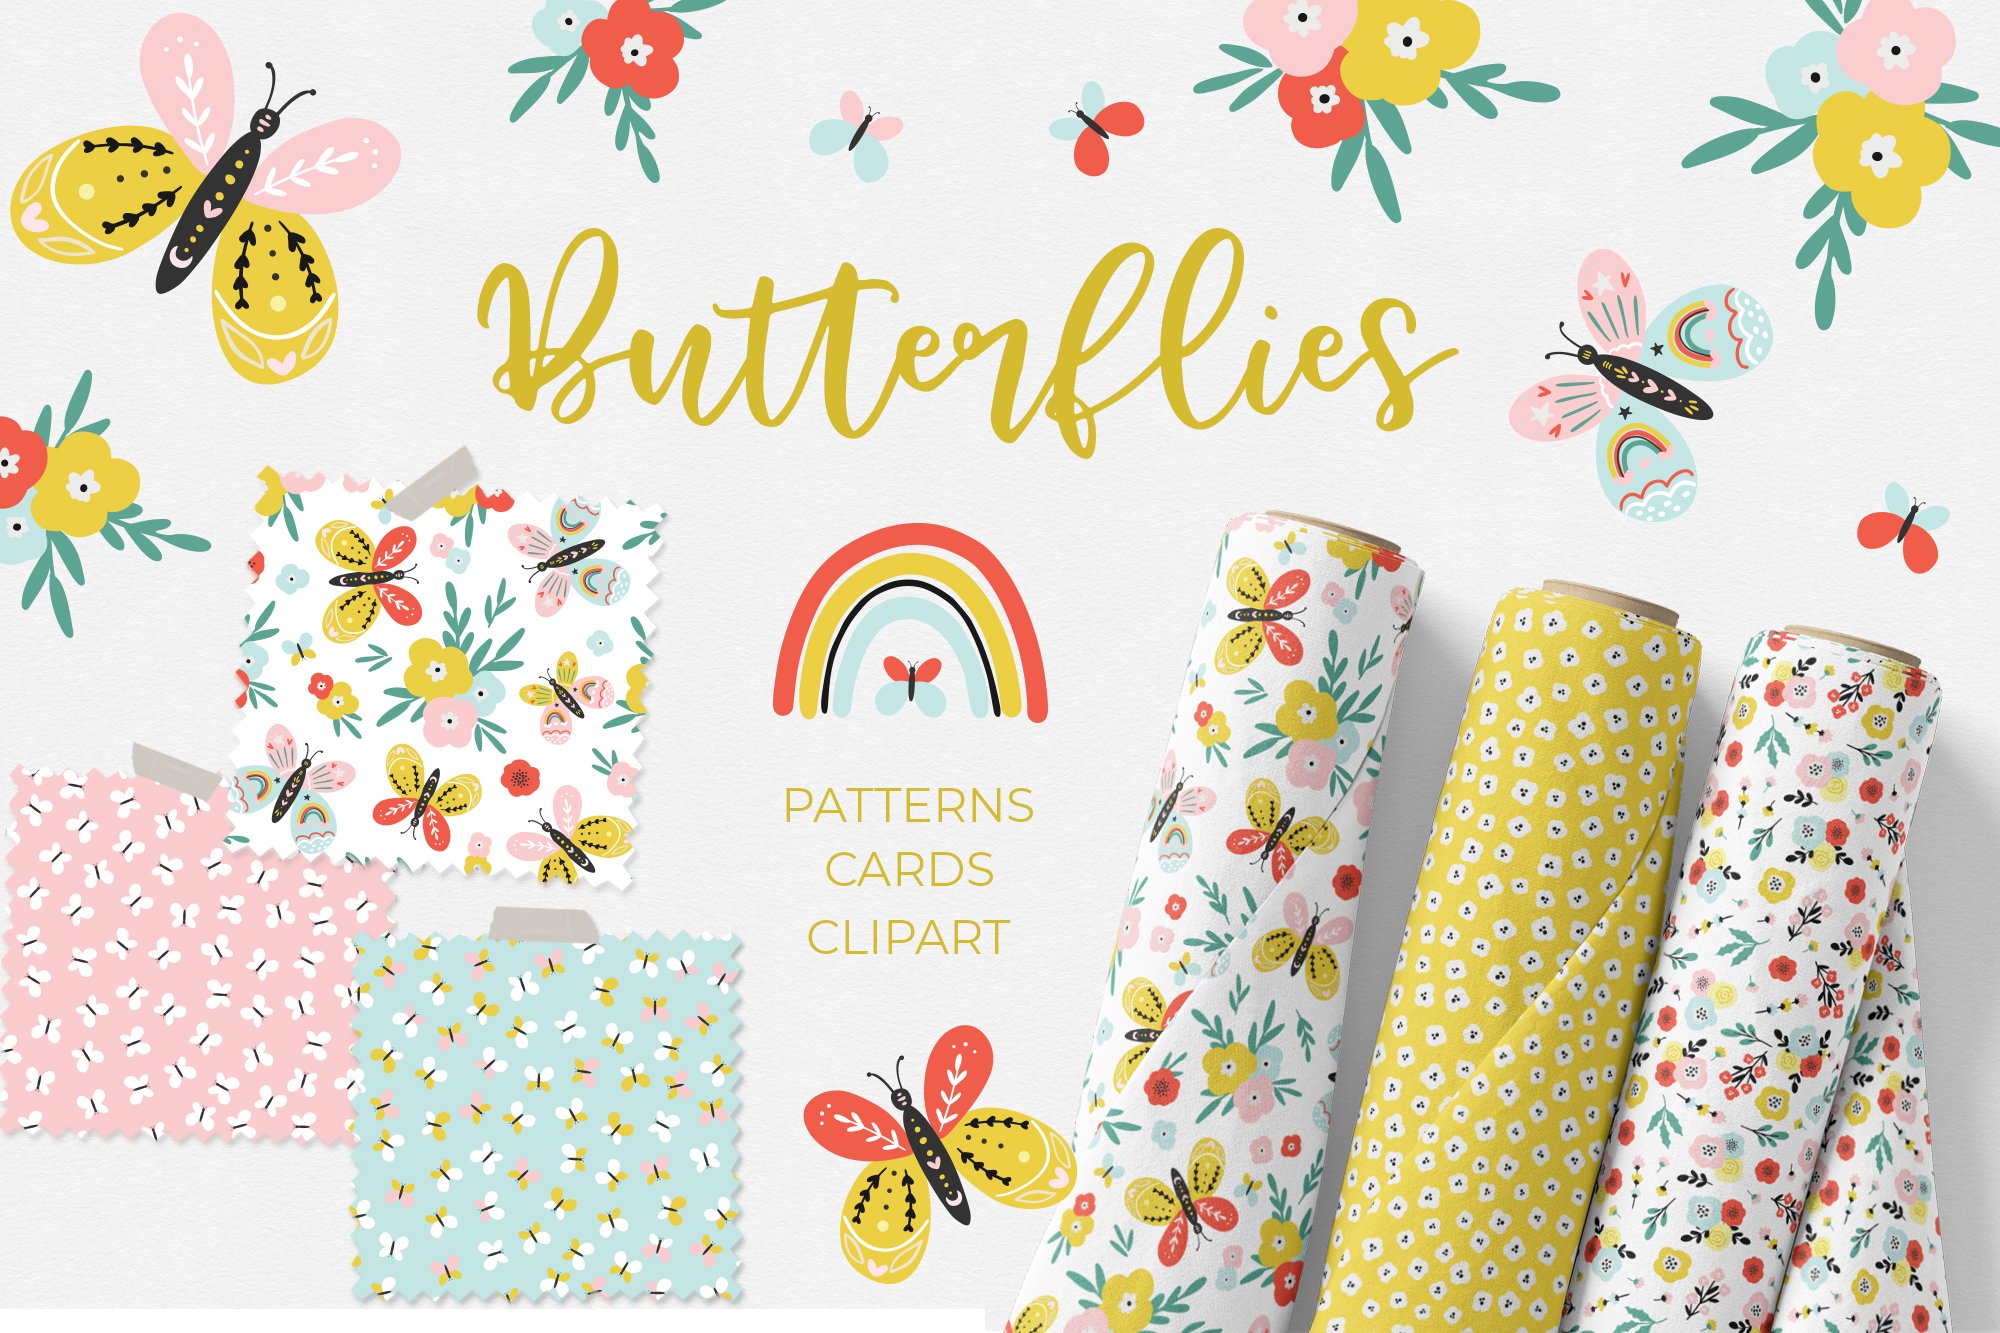 Butterflies patterns & clipart cover image.